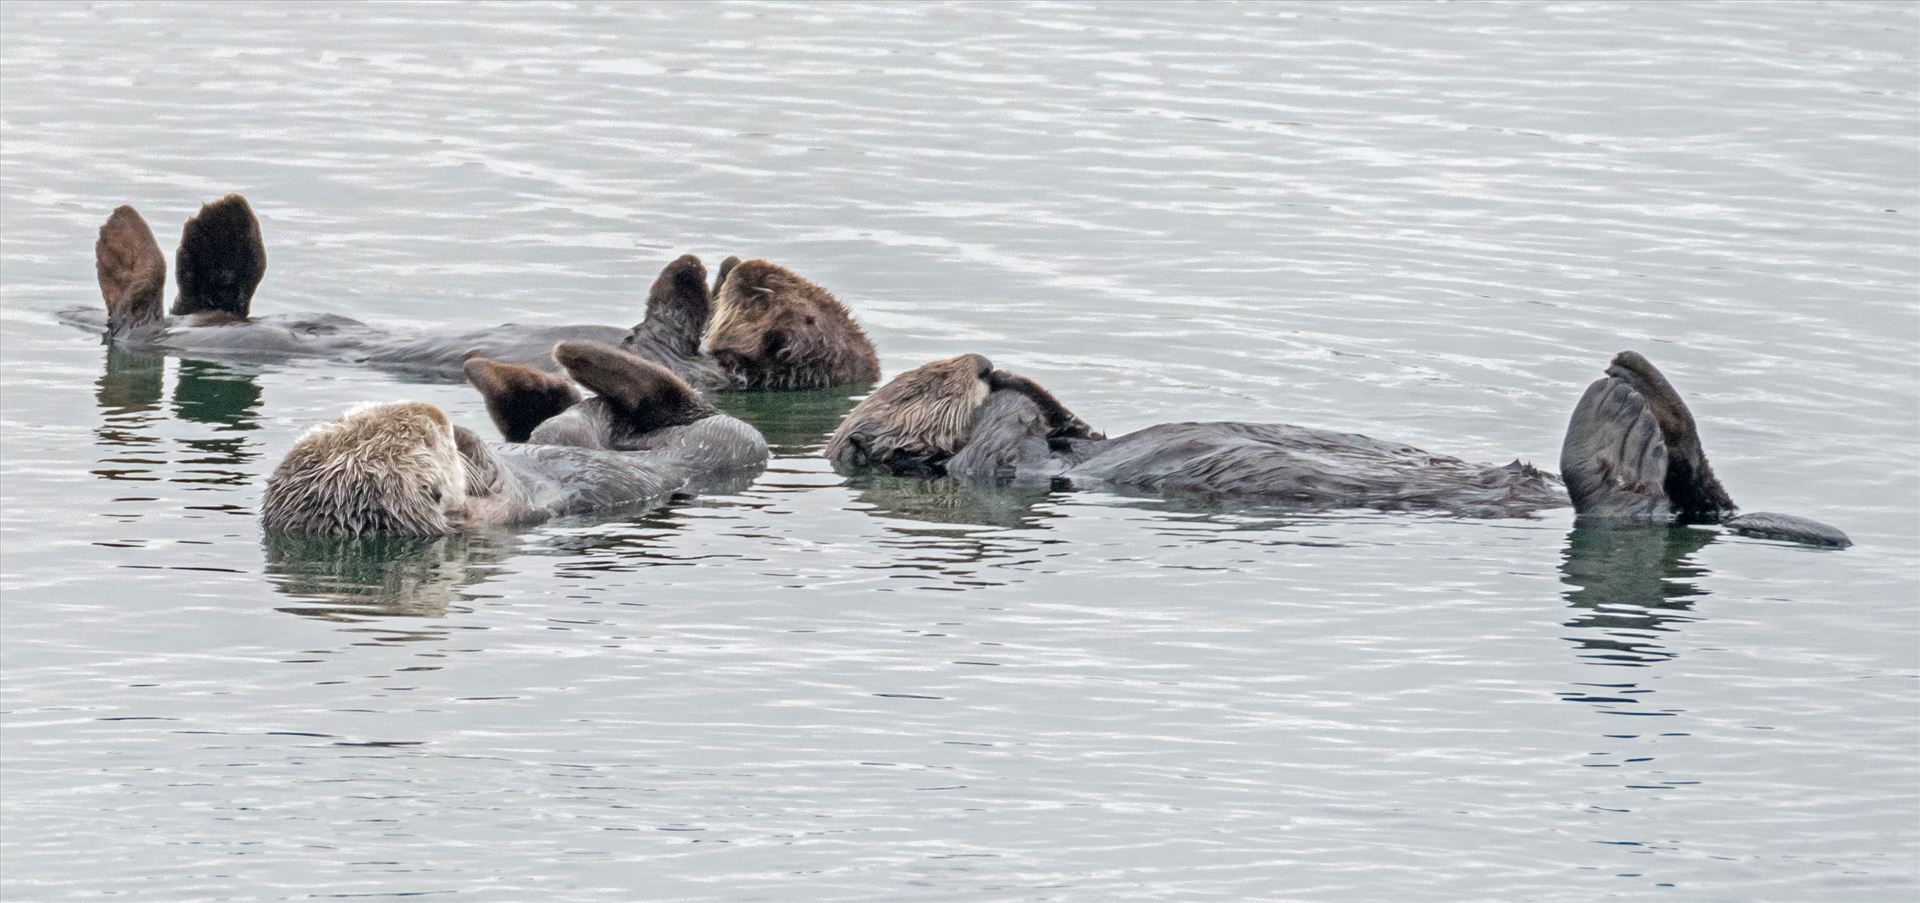 Sea Otter Prayer Group sea otters resting in a group by Denise Buckley Crawford